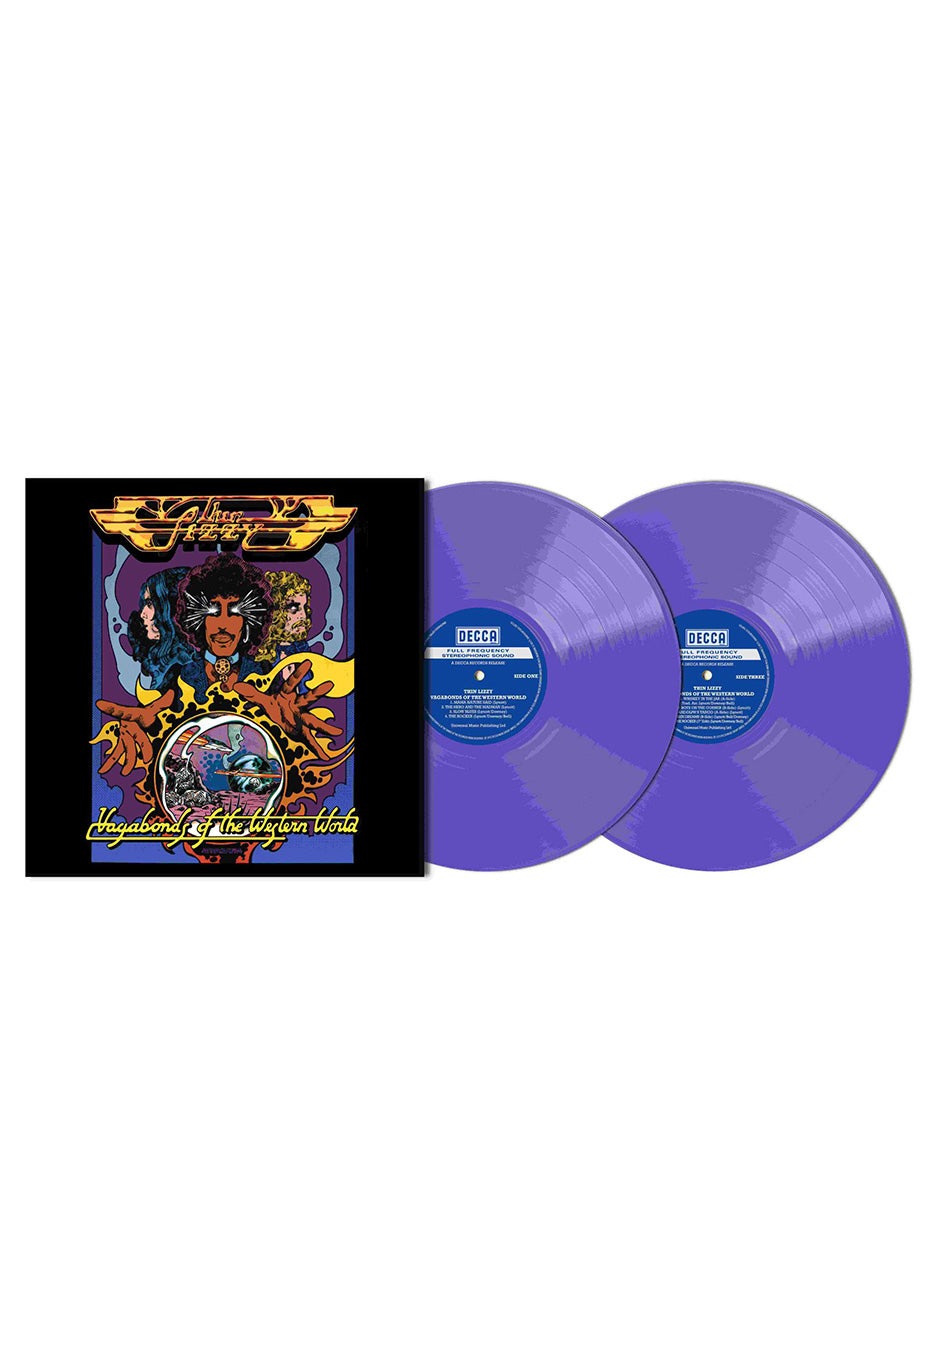 Thin Lizzy - Vagabonds Of The Western World (Ltd. Deluxe Edition) Purple - Colored 2 Vinyl 